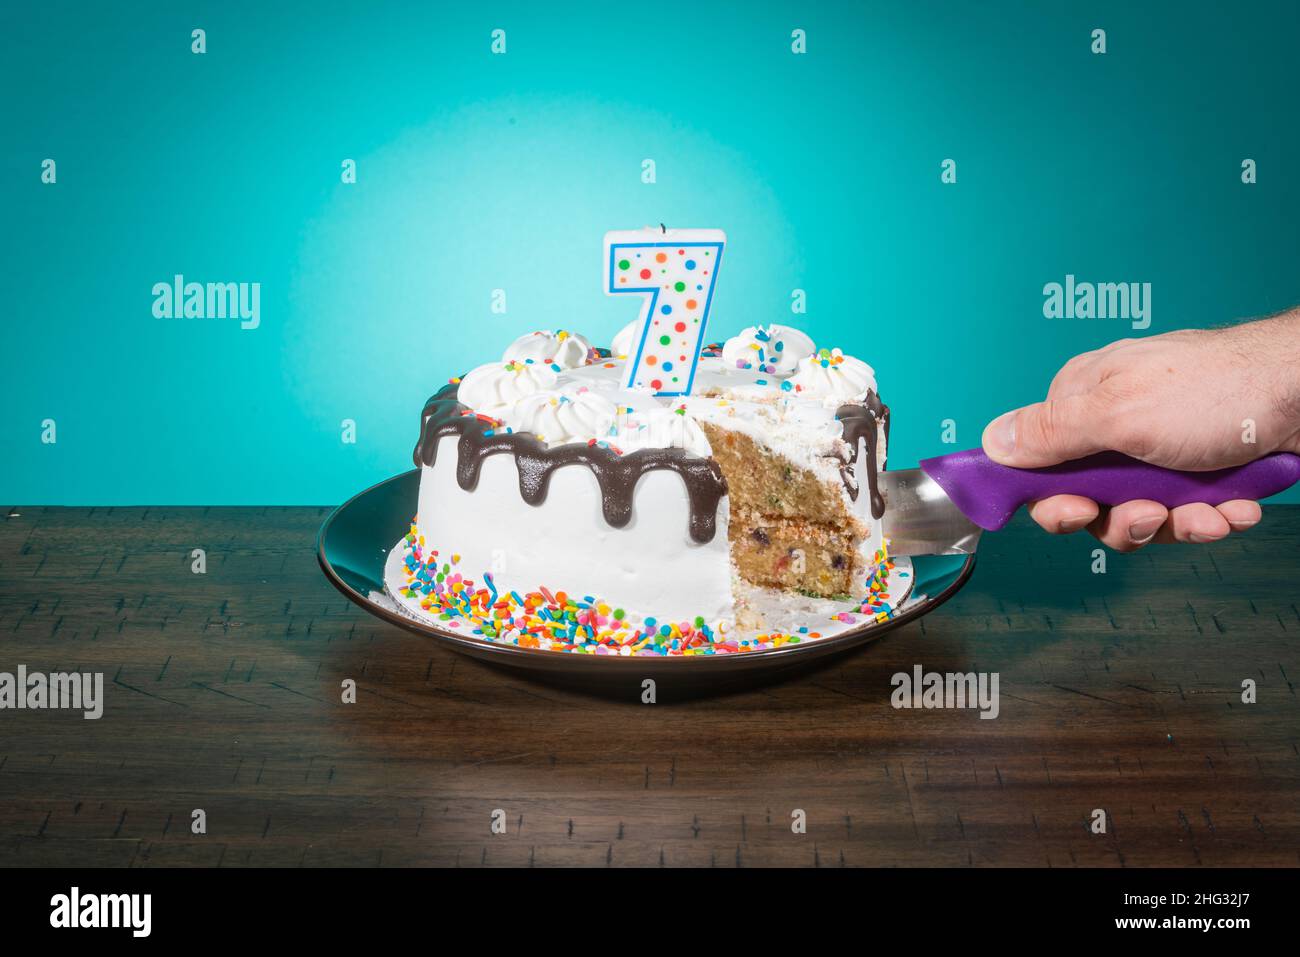 A birthday cake, missing a slice, bears a candle in the shape of the number 7 while a hand cuts another slice. Stock Photo